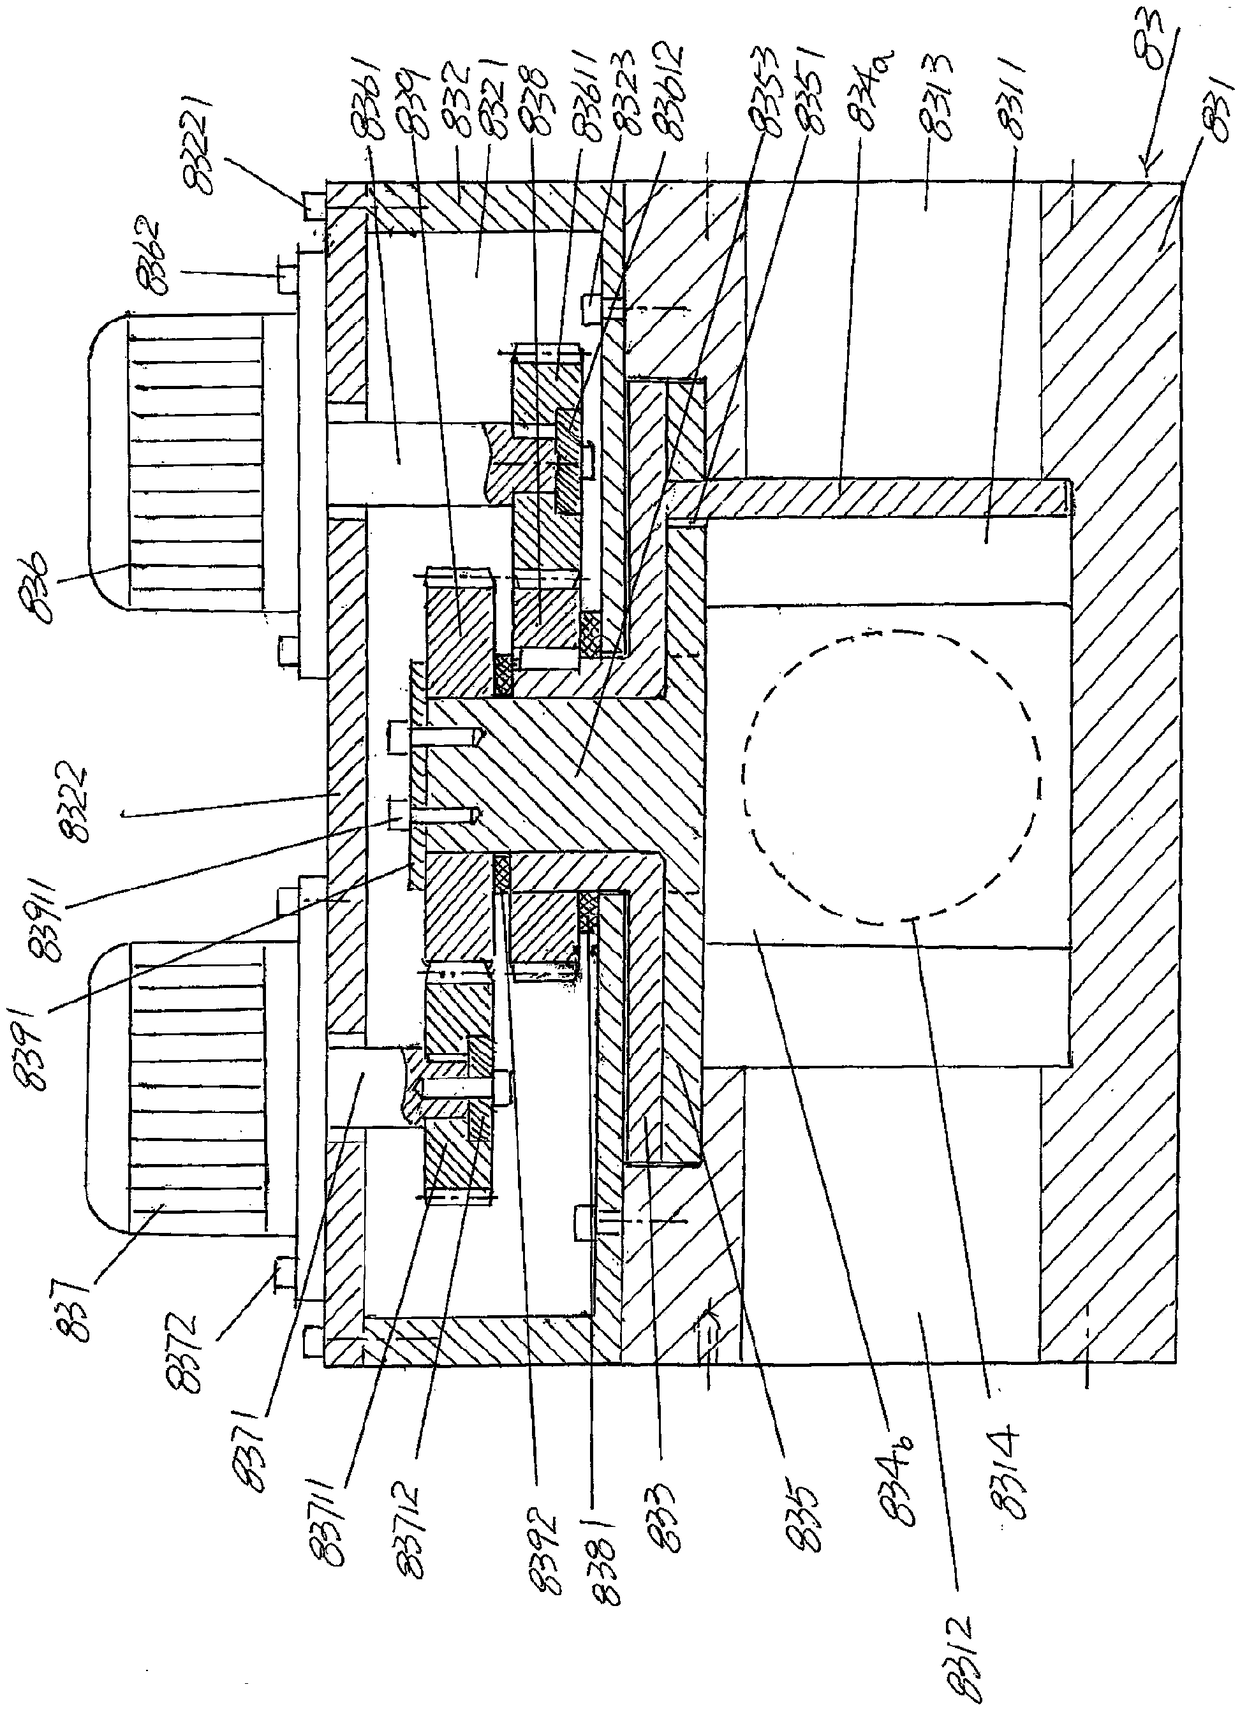 Airflow guide reversing valve structure for circulating homogenizing device for foam materials and bottle flakes